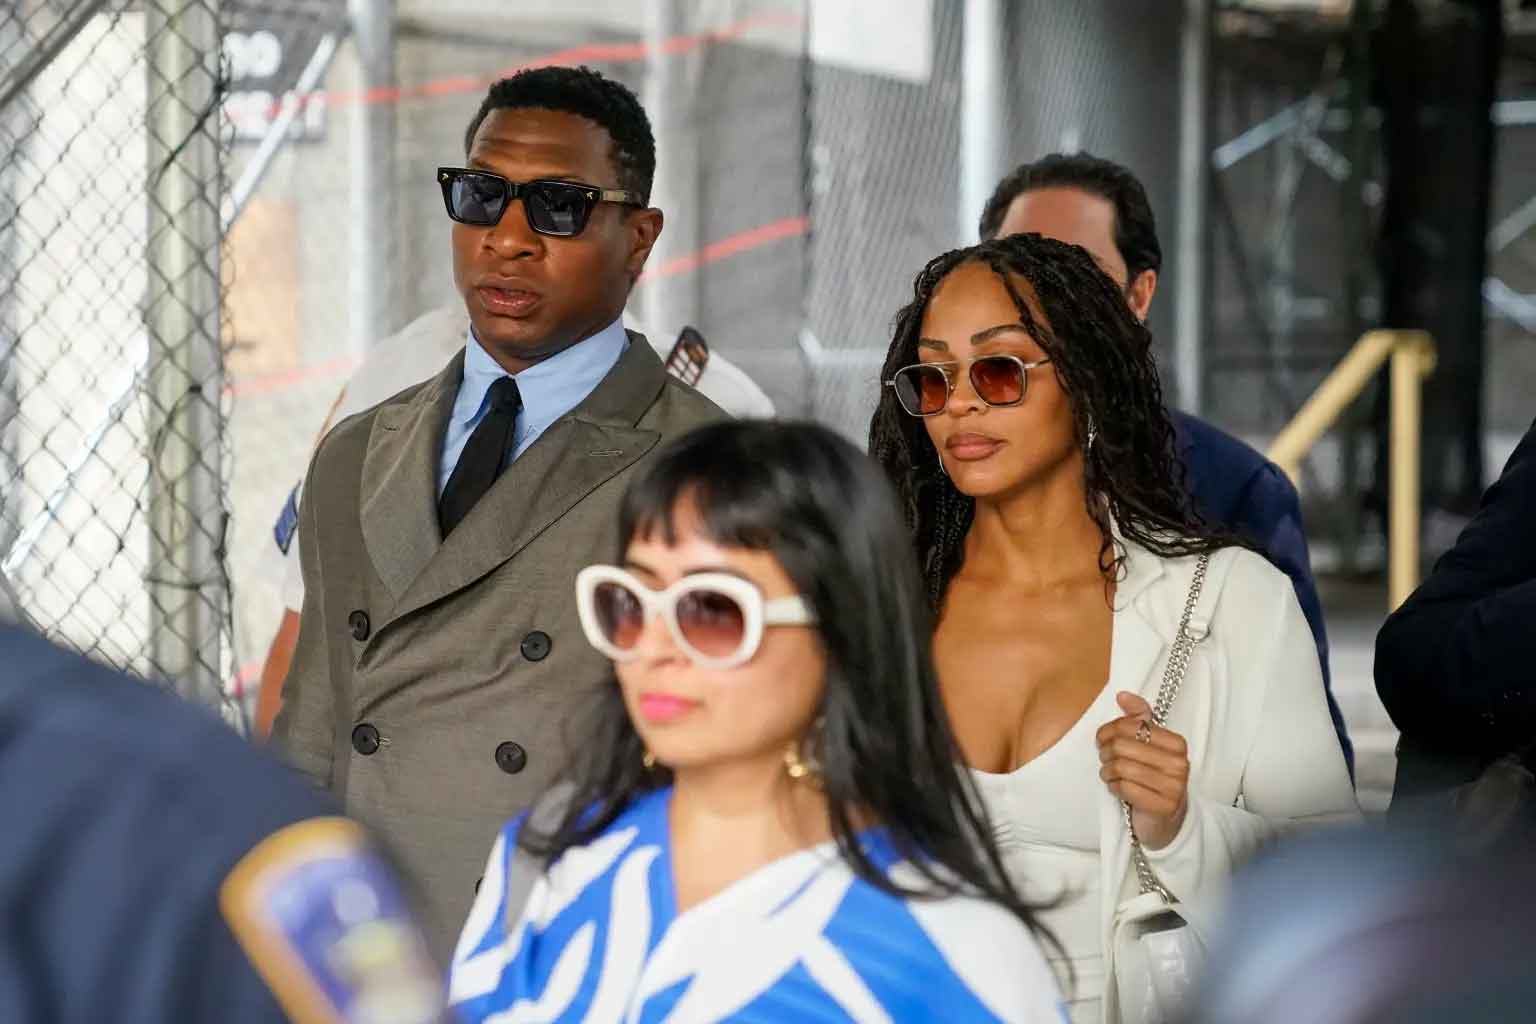 Inside Jonathan Majors first court hearing over domestic violence charges